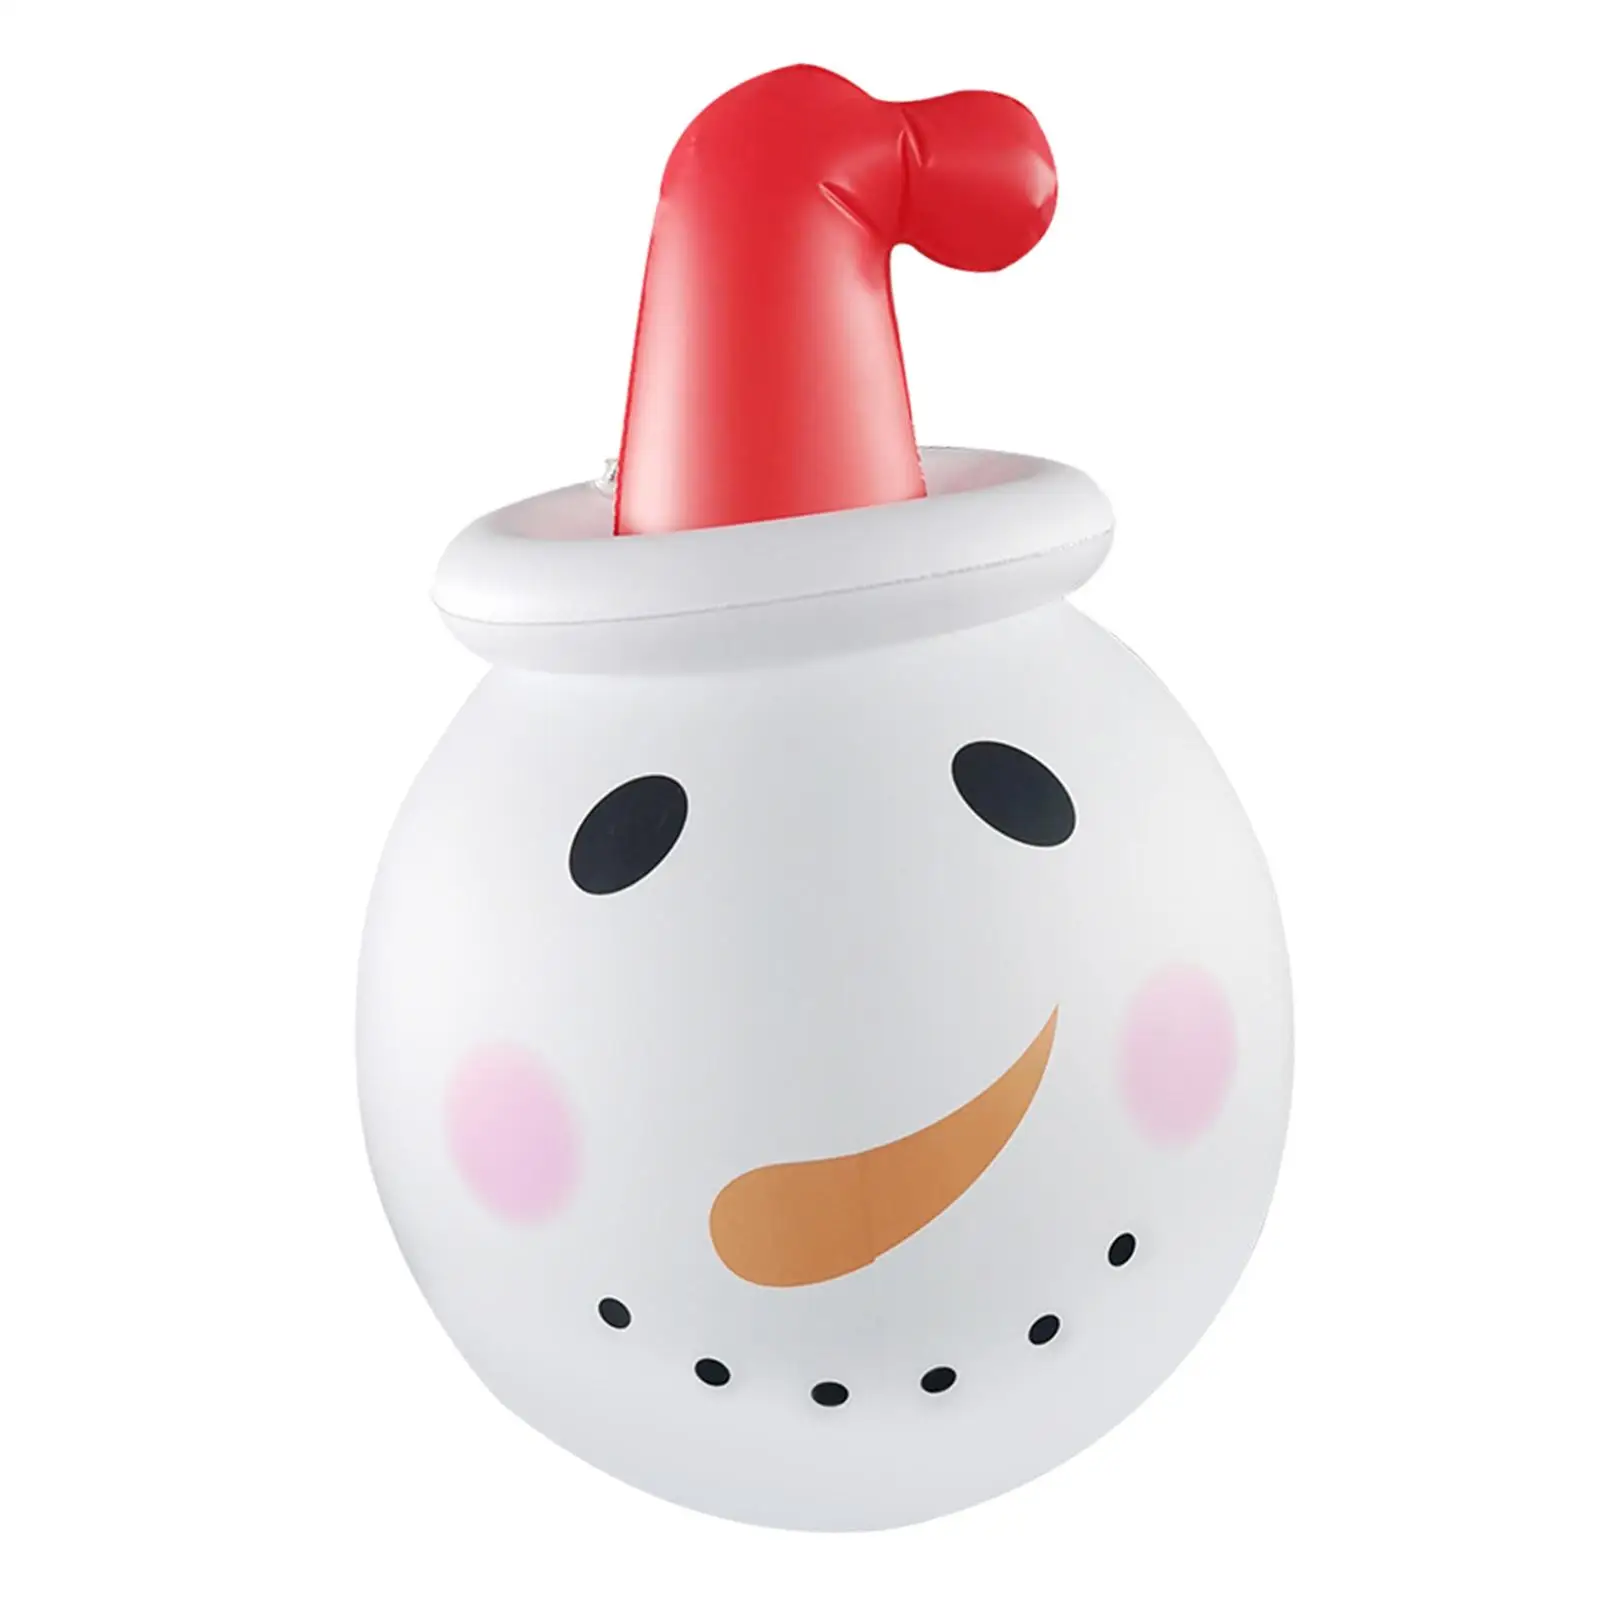 Christmas Inflatable Snowman Ornament Night Lamp for Cafe Home Furnishings